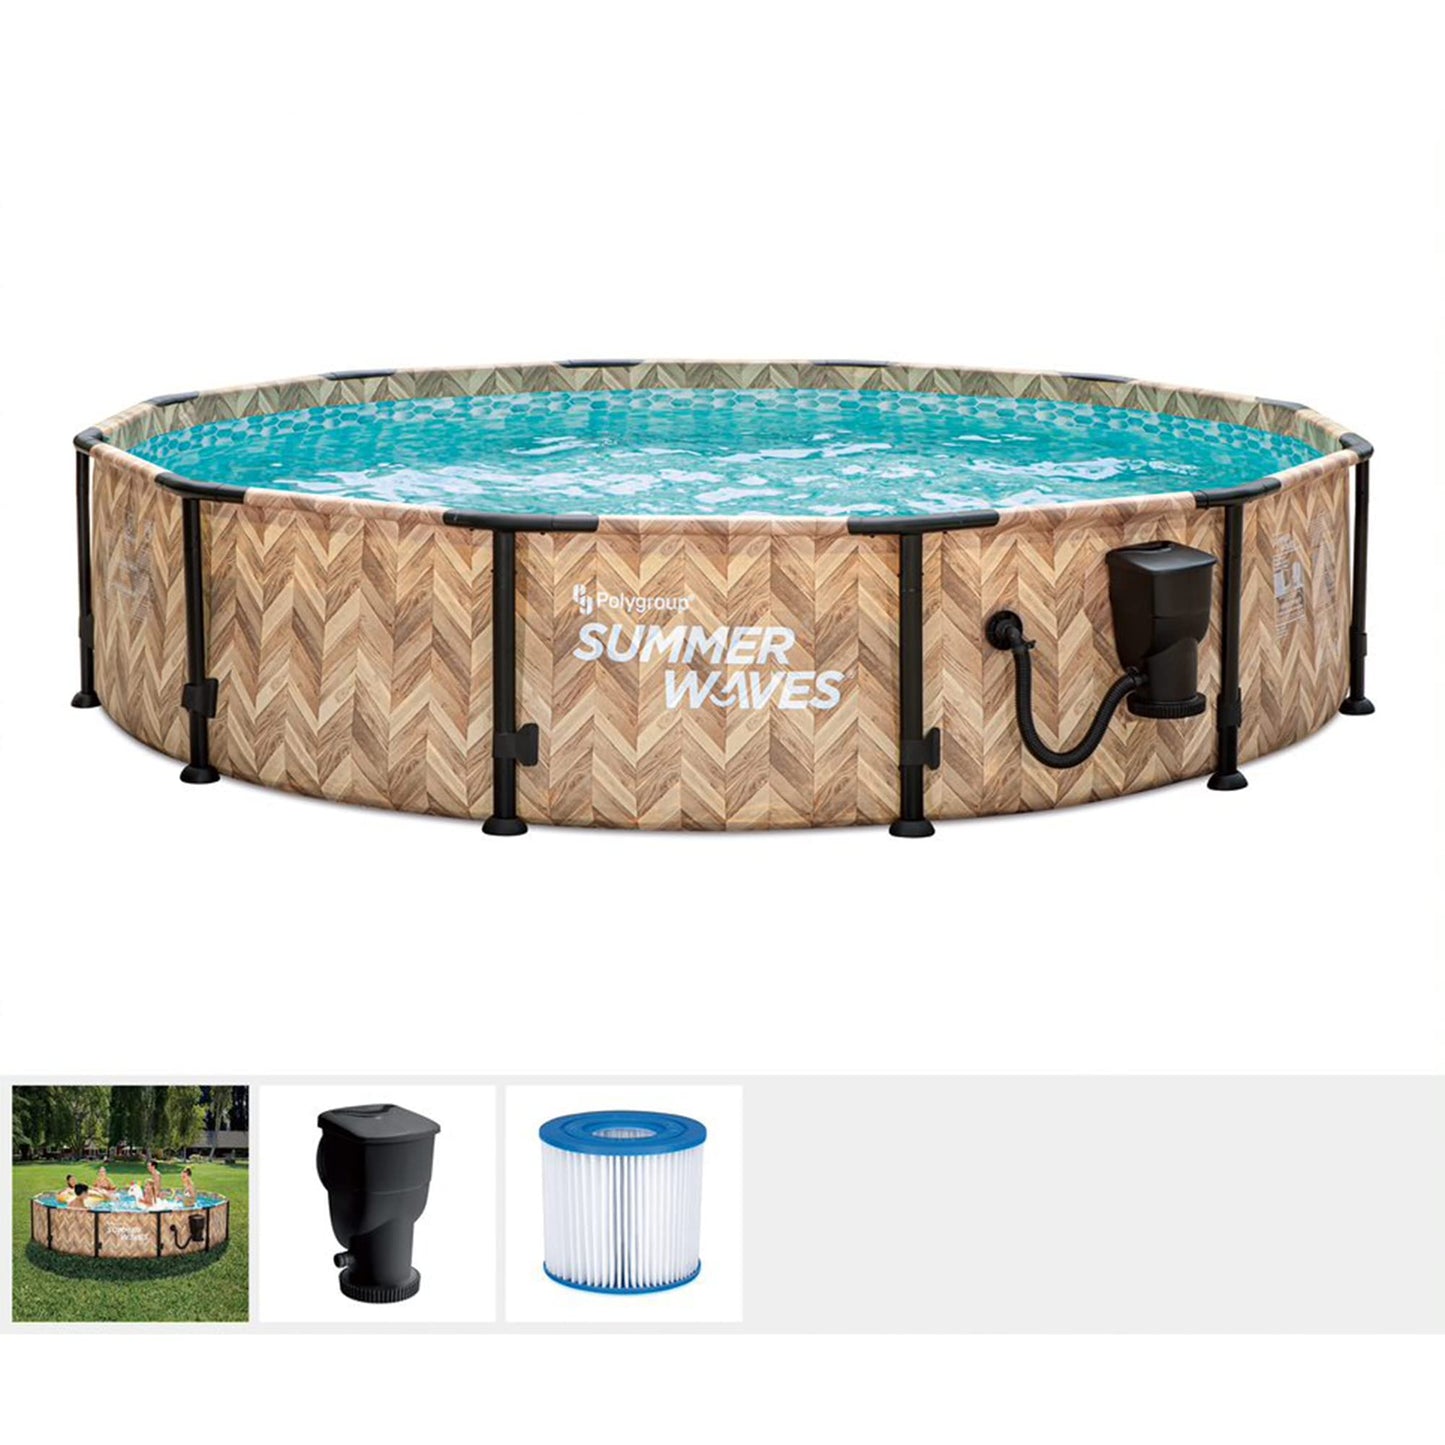 Summer Waves Oak Herringbone Elite 12' x 30" Outdoor Backyard Round Frame Above Ground Swimming Pool Set with Filter Pump, Cartridge, and Repair Patch